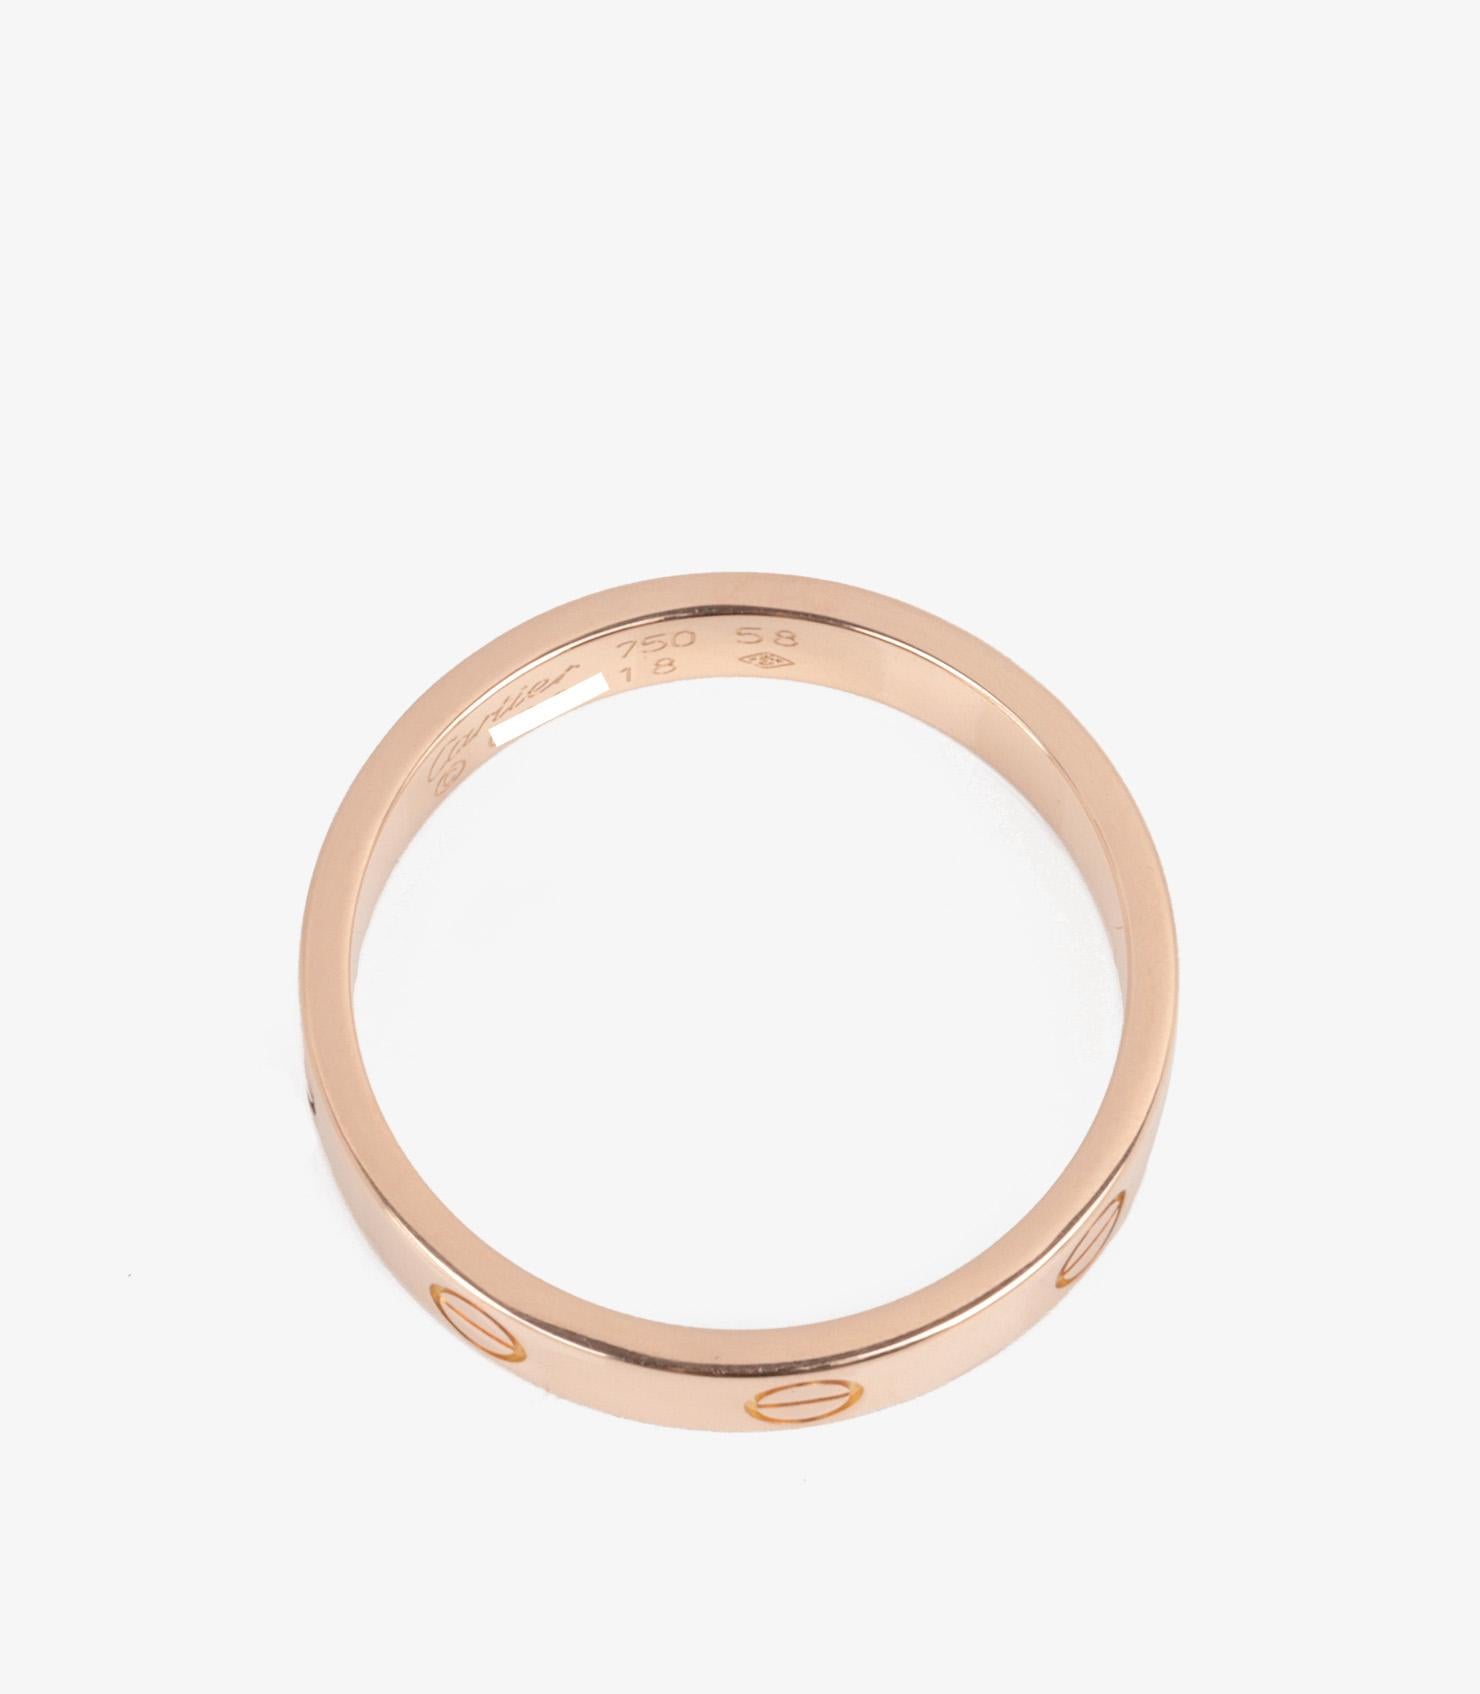 Cartier 18ct Rose Gold Love Wedding Band

Brand- Cartier
Model- Love Wedding Band
Product Type- Ring
Serial Number- GD****
Material(s)- 18ct Rose Gold
UK Ring Size- Q 1/2
EU Ring Size- 58
US Ring Size- 8 1/4
Resizing Possible- No

Band Width-